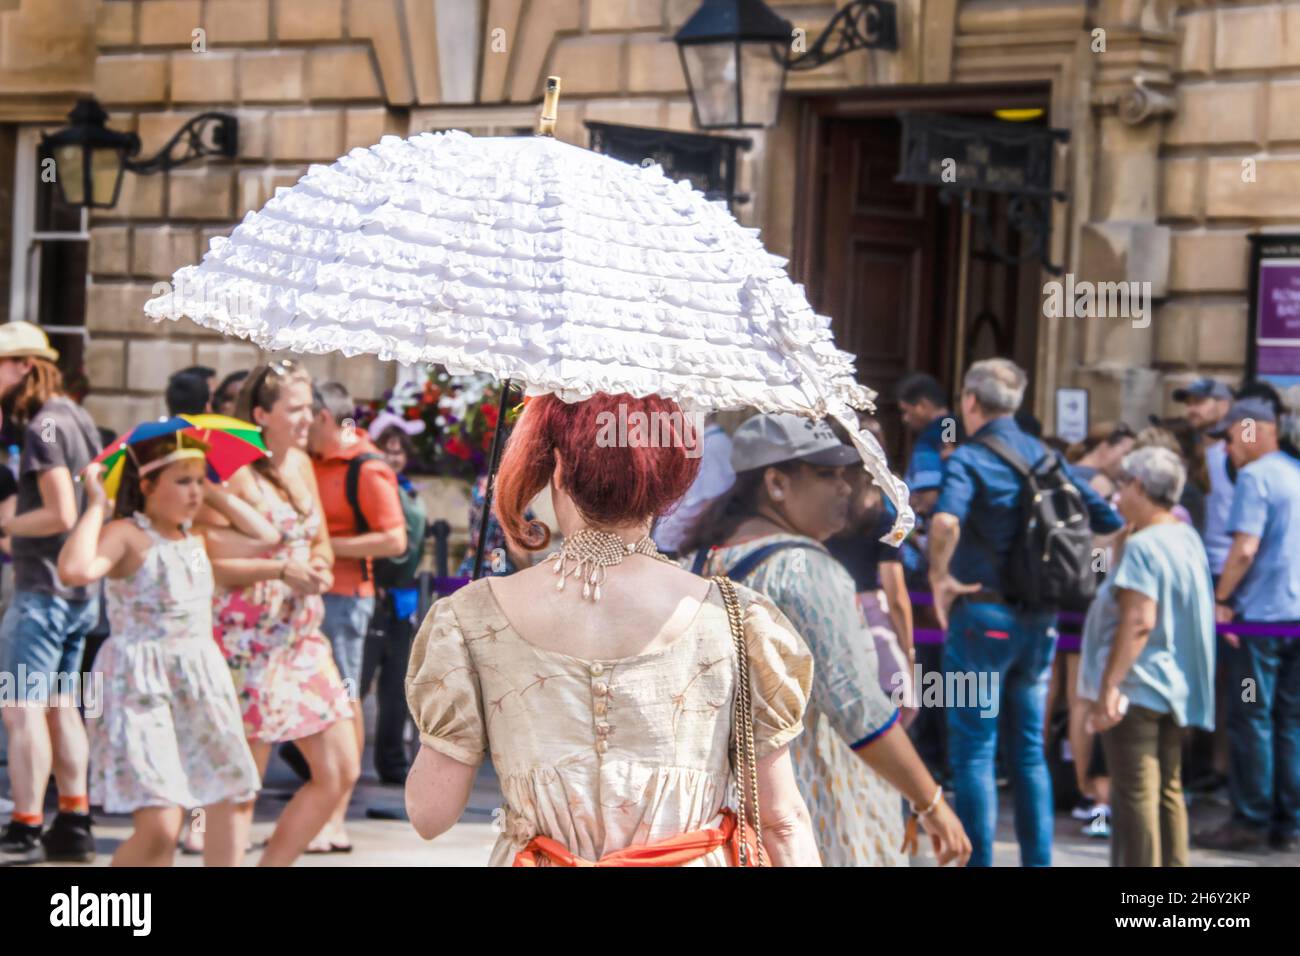 2019_07_25 Bath UK back of woman dressed in Regency Jane Austen period clothing with white ruffled parasol walking among crowd of tourists Stock Photo